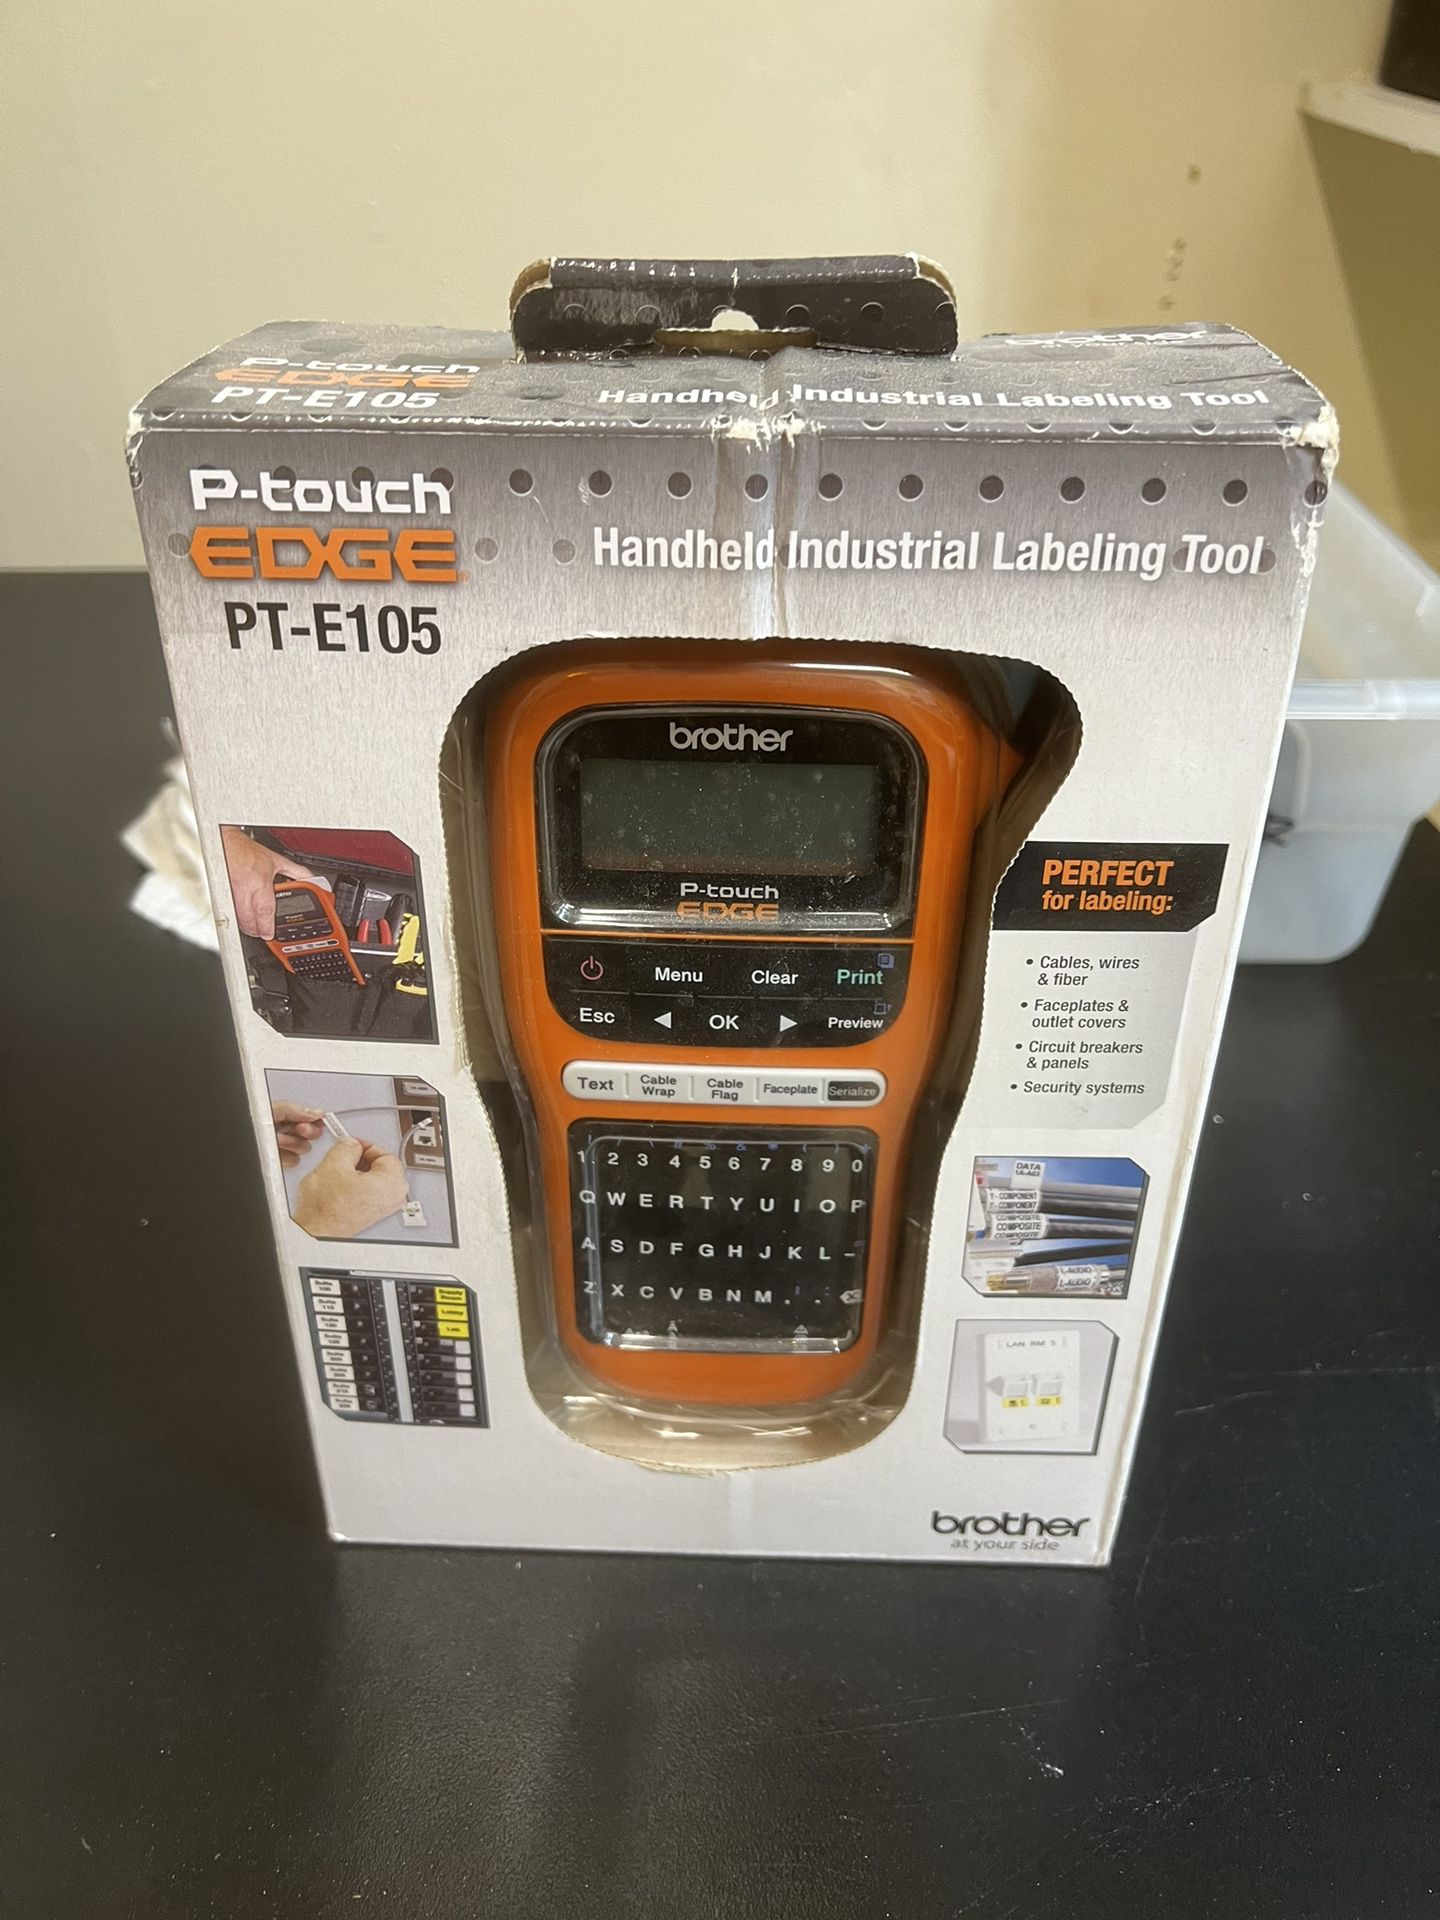 BRAND NEW Brother P-Touch Edge PT-E105 Handheld Industrial Electric Label Maker 